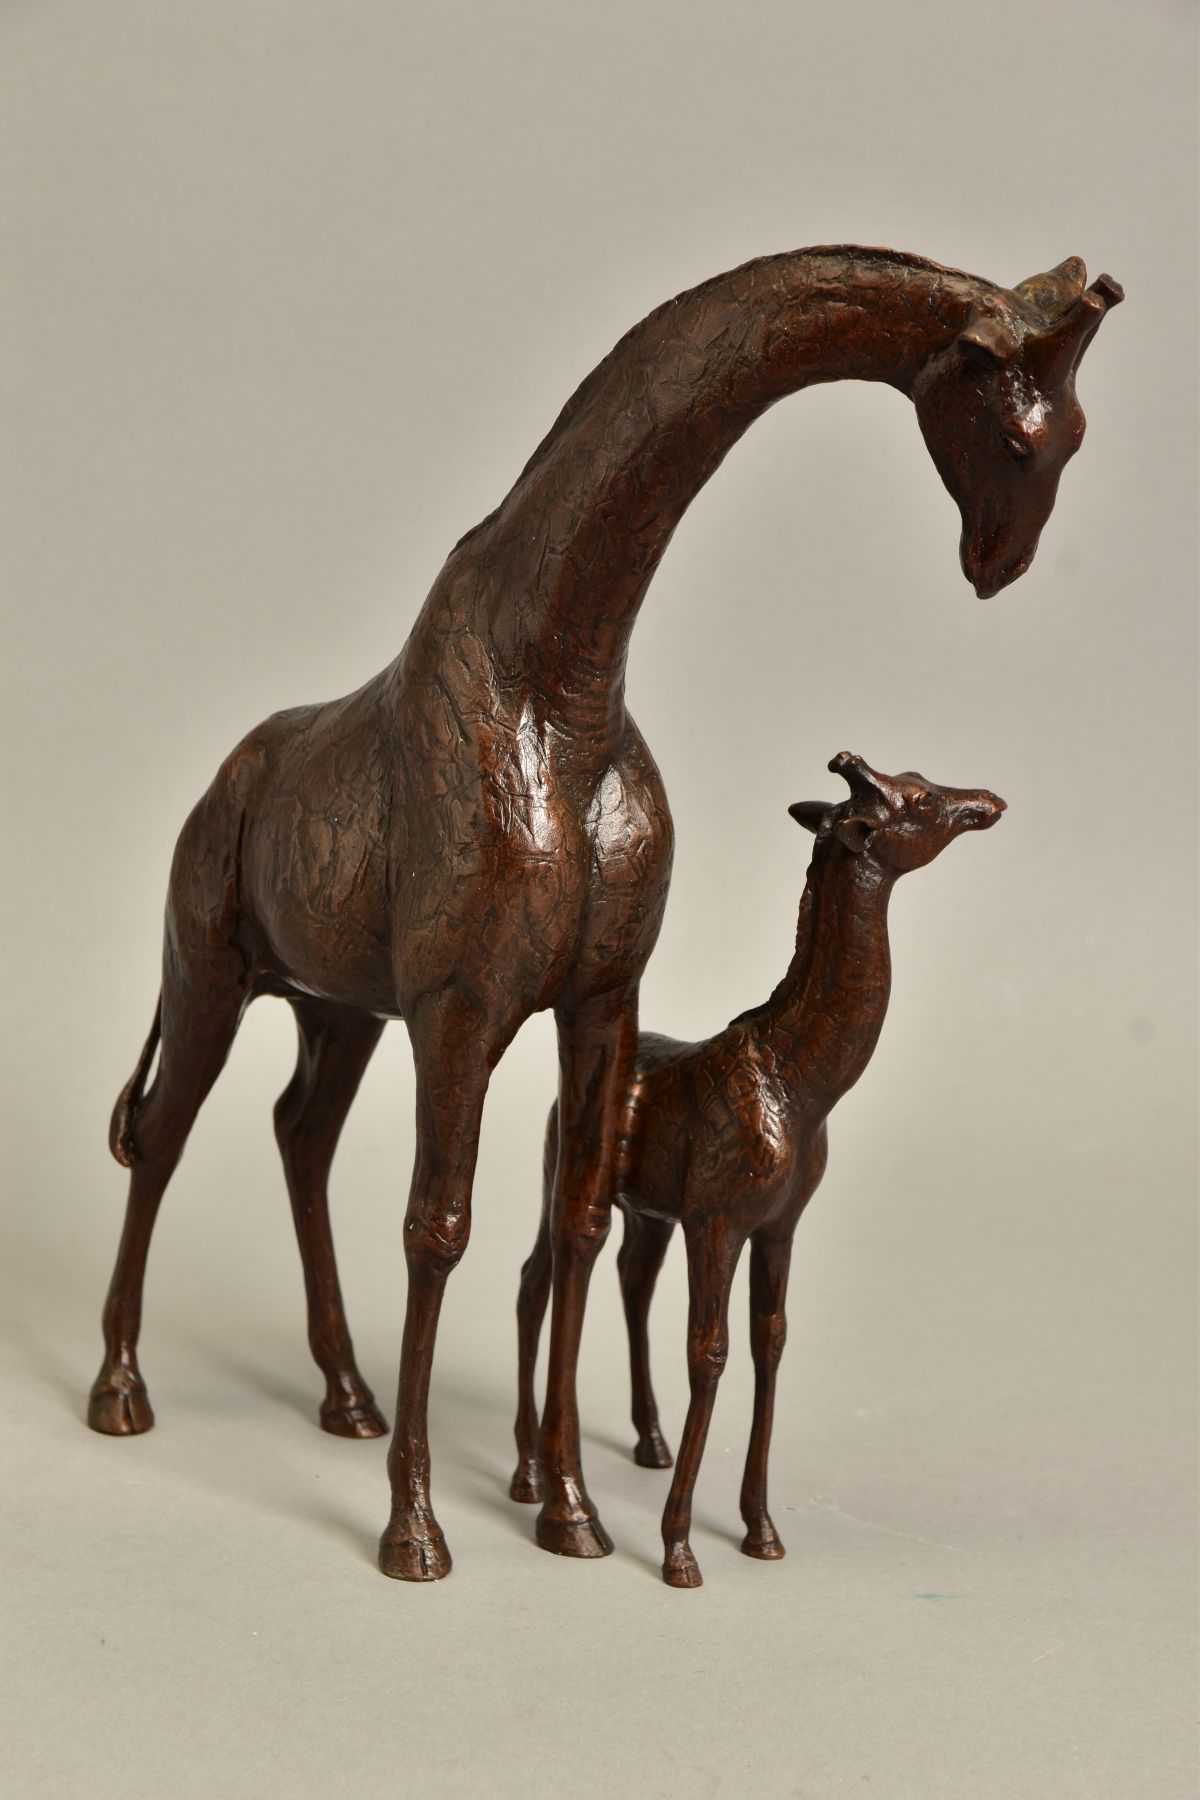 MICHAEL SIMPSON (BRITISH CONTEMPORARY) 'HIGH HOPES', a limited edition bronze sculpture of a giraffe - Image 3 of 5